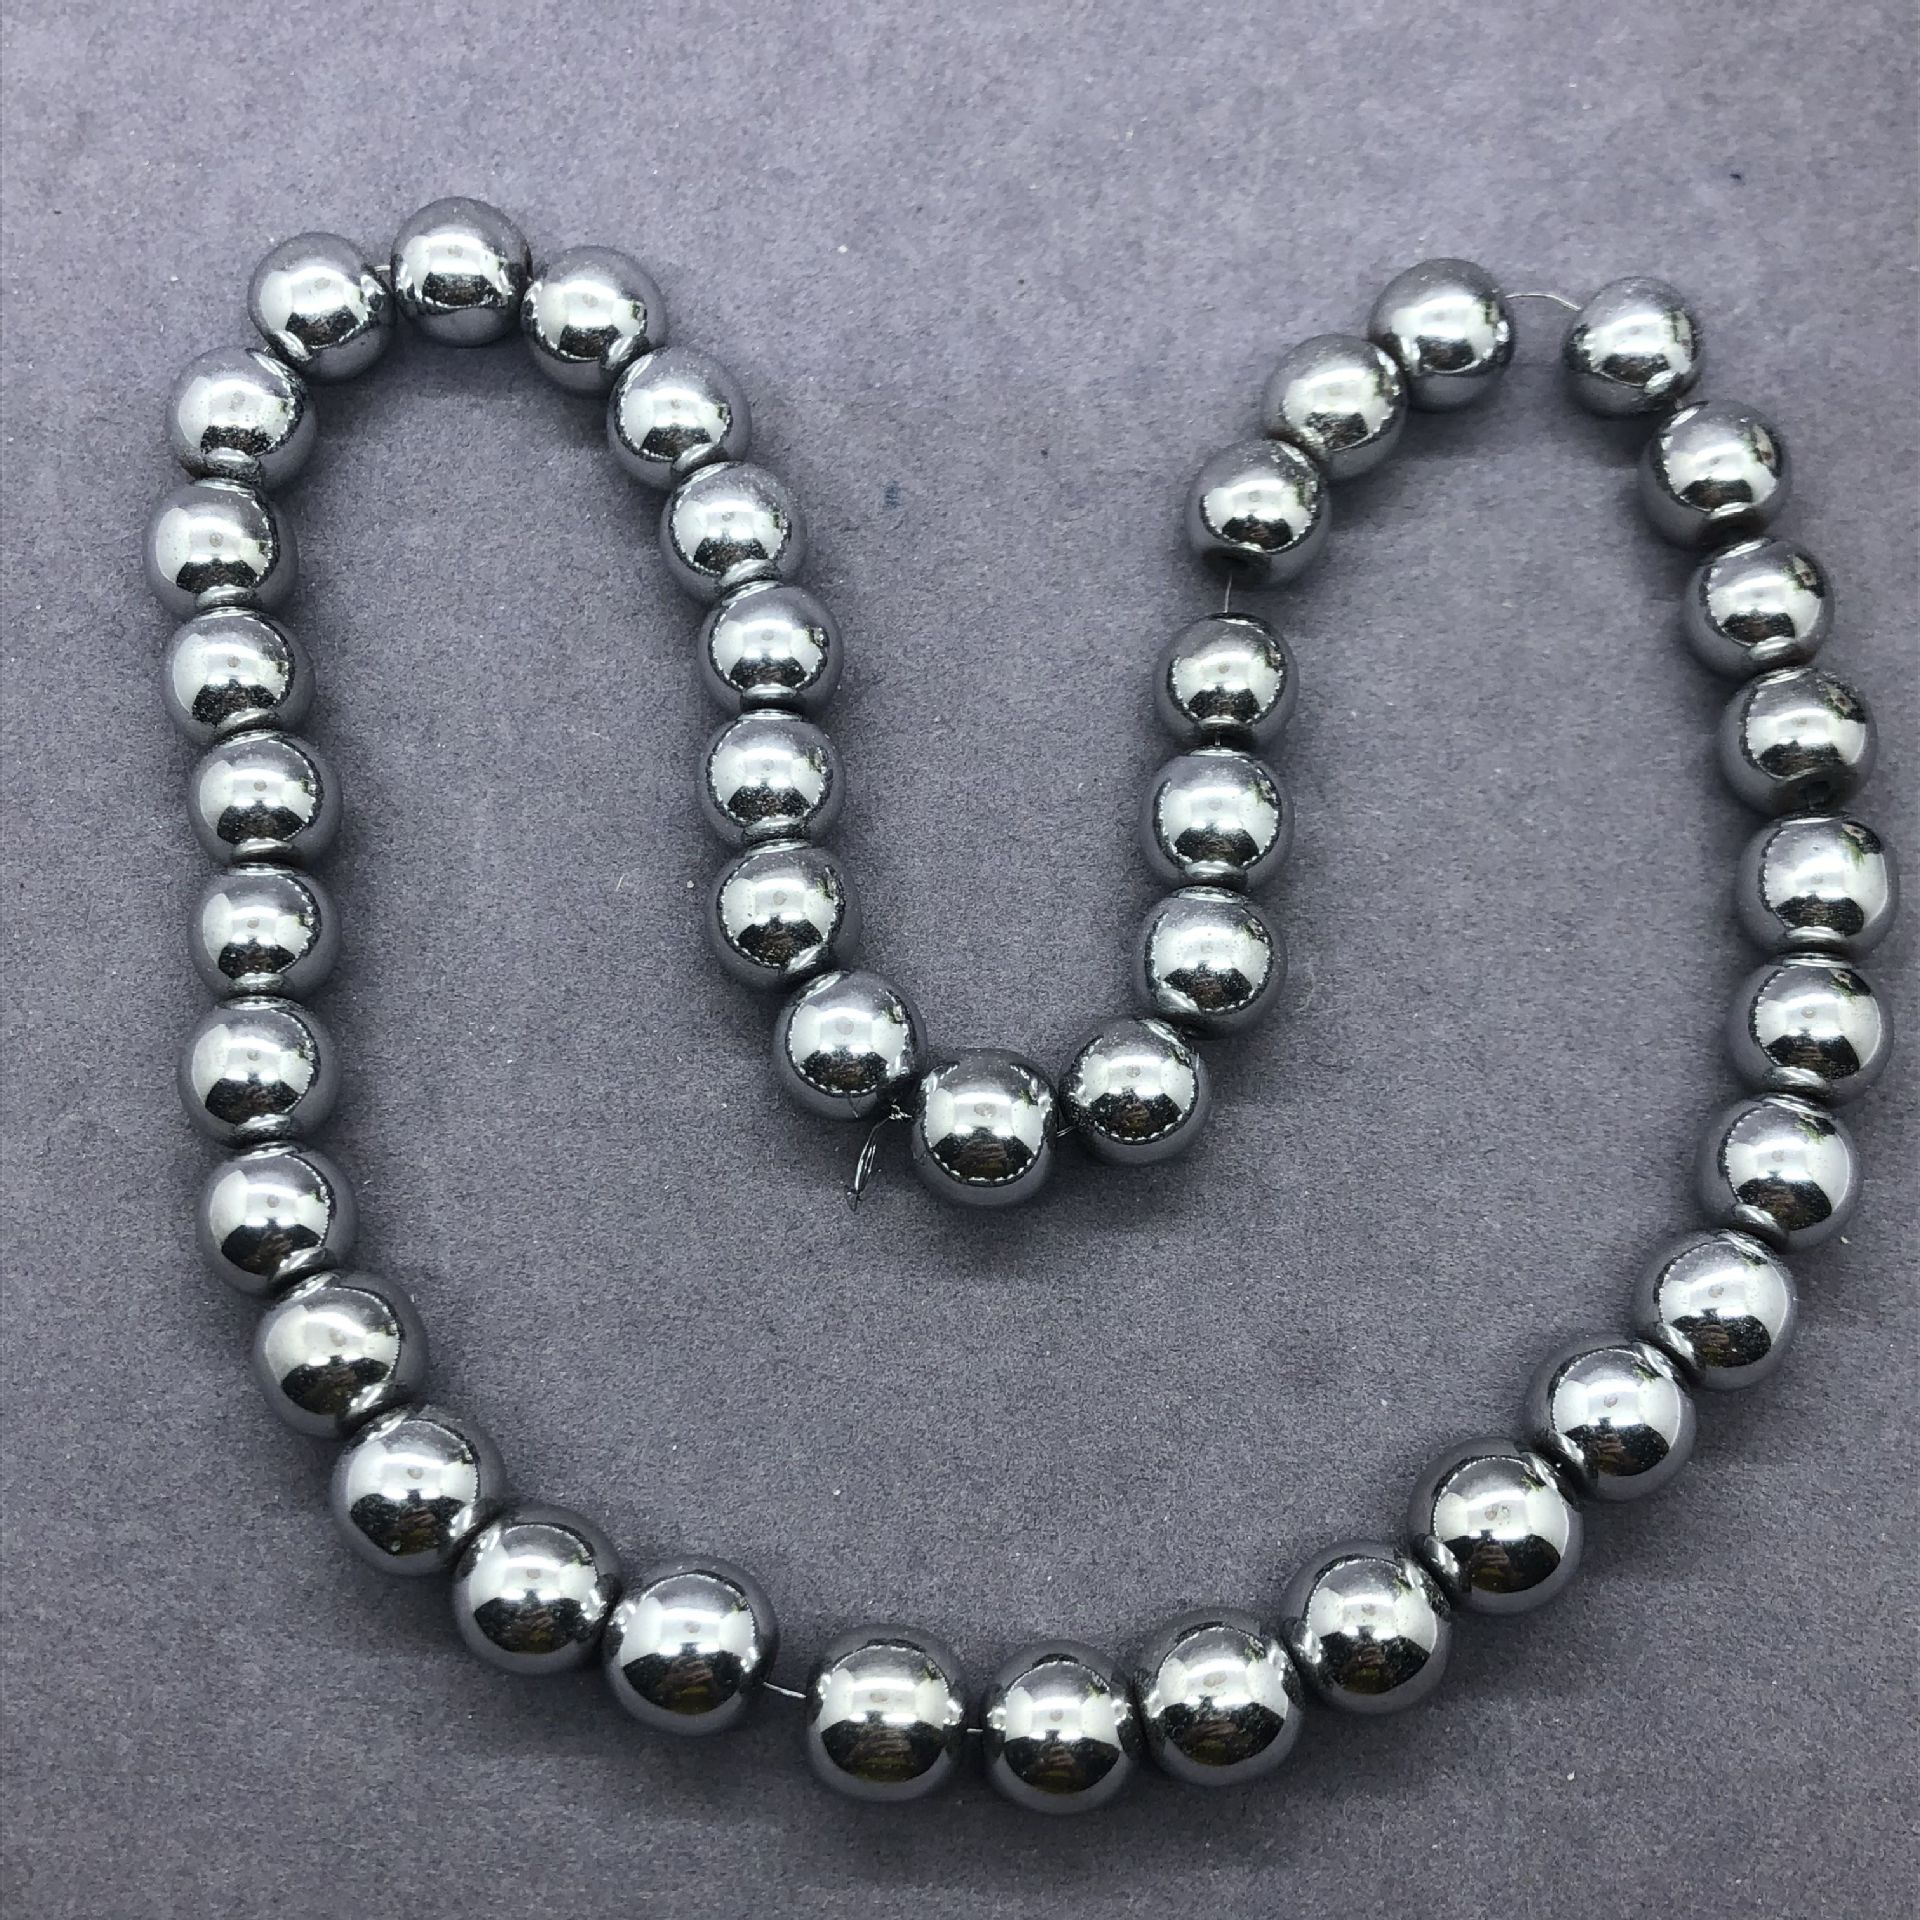 White K Silver 8mm (≈47 pieces)